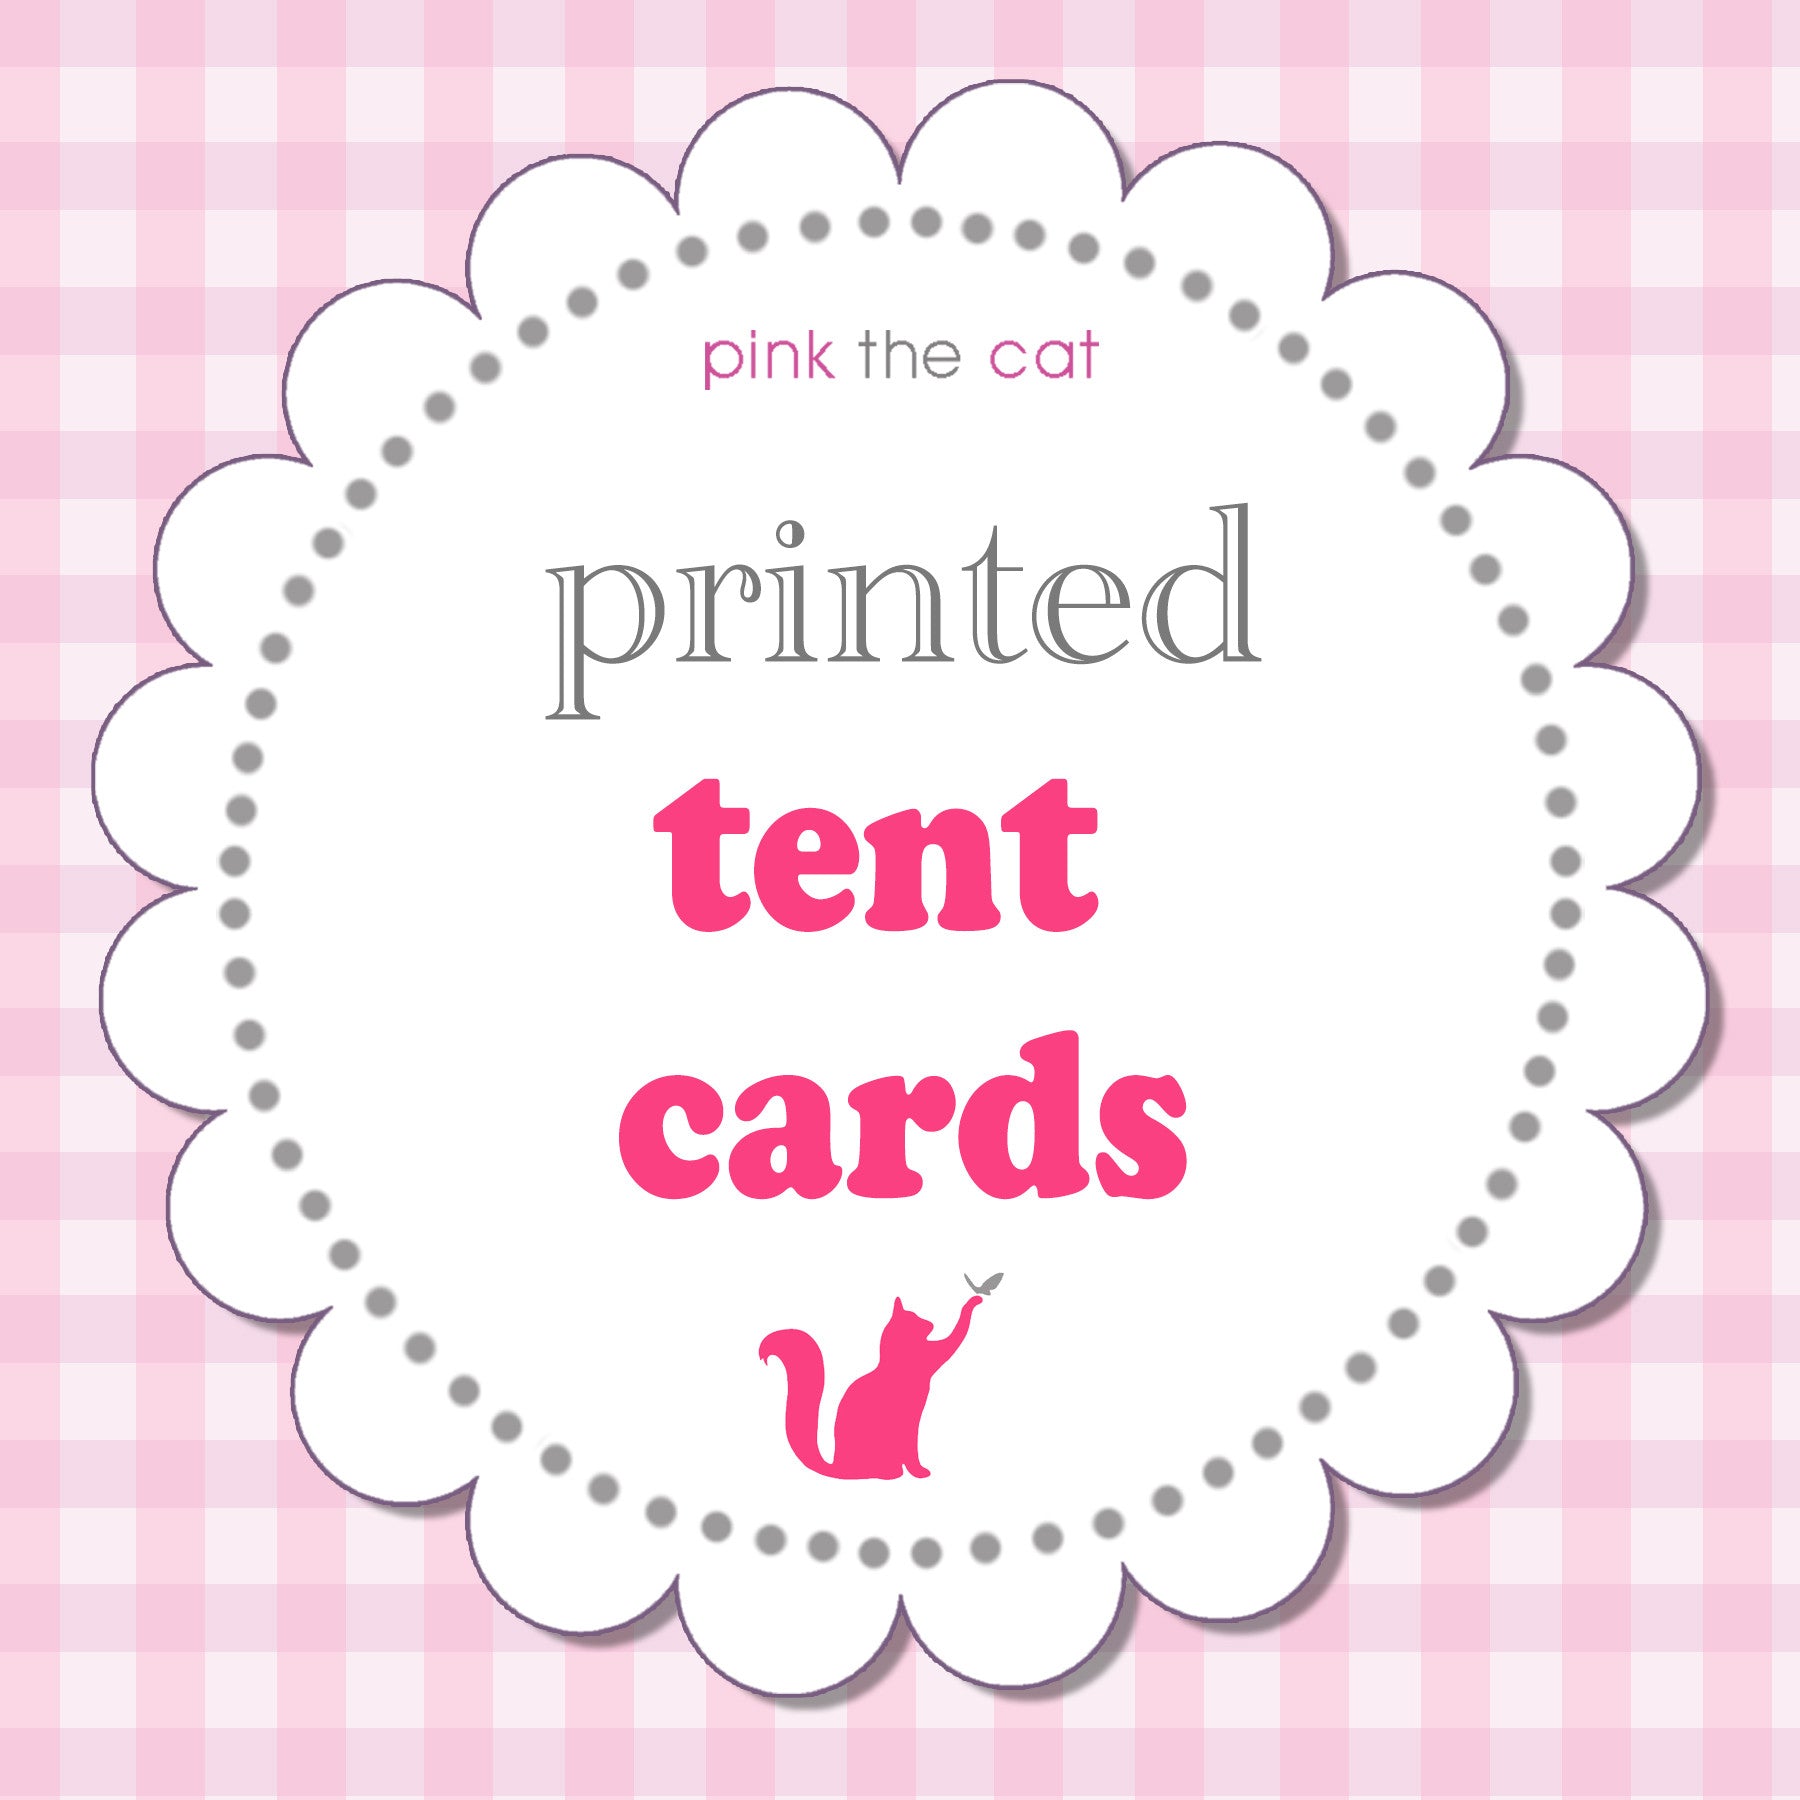 Printed tent cards - Pack of 30